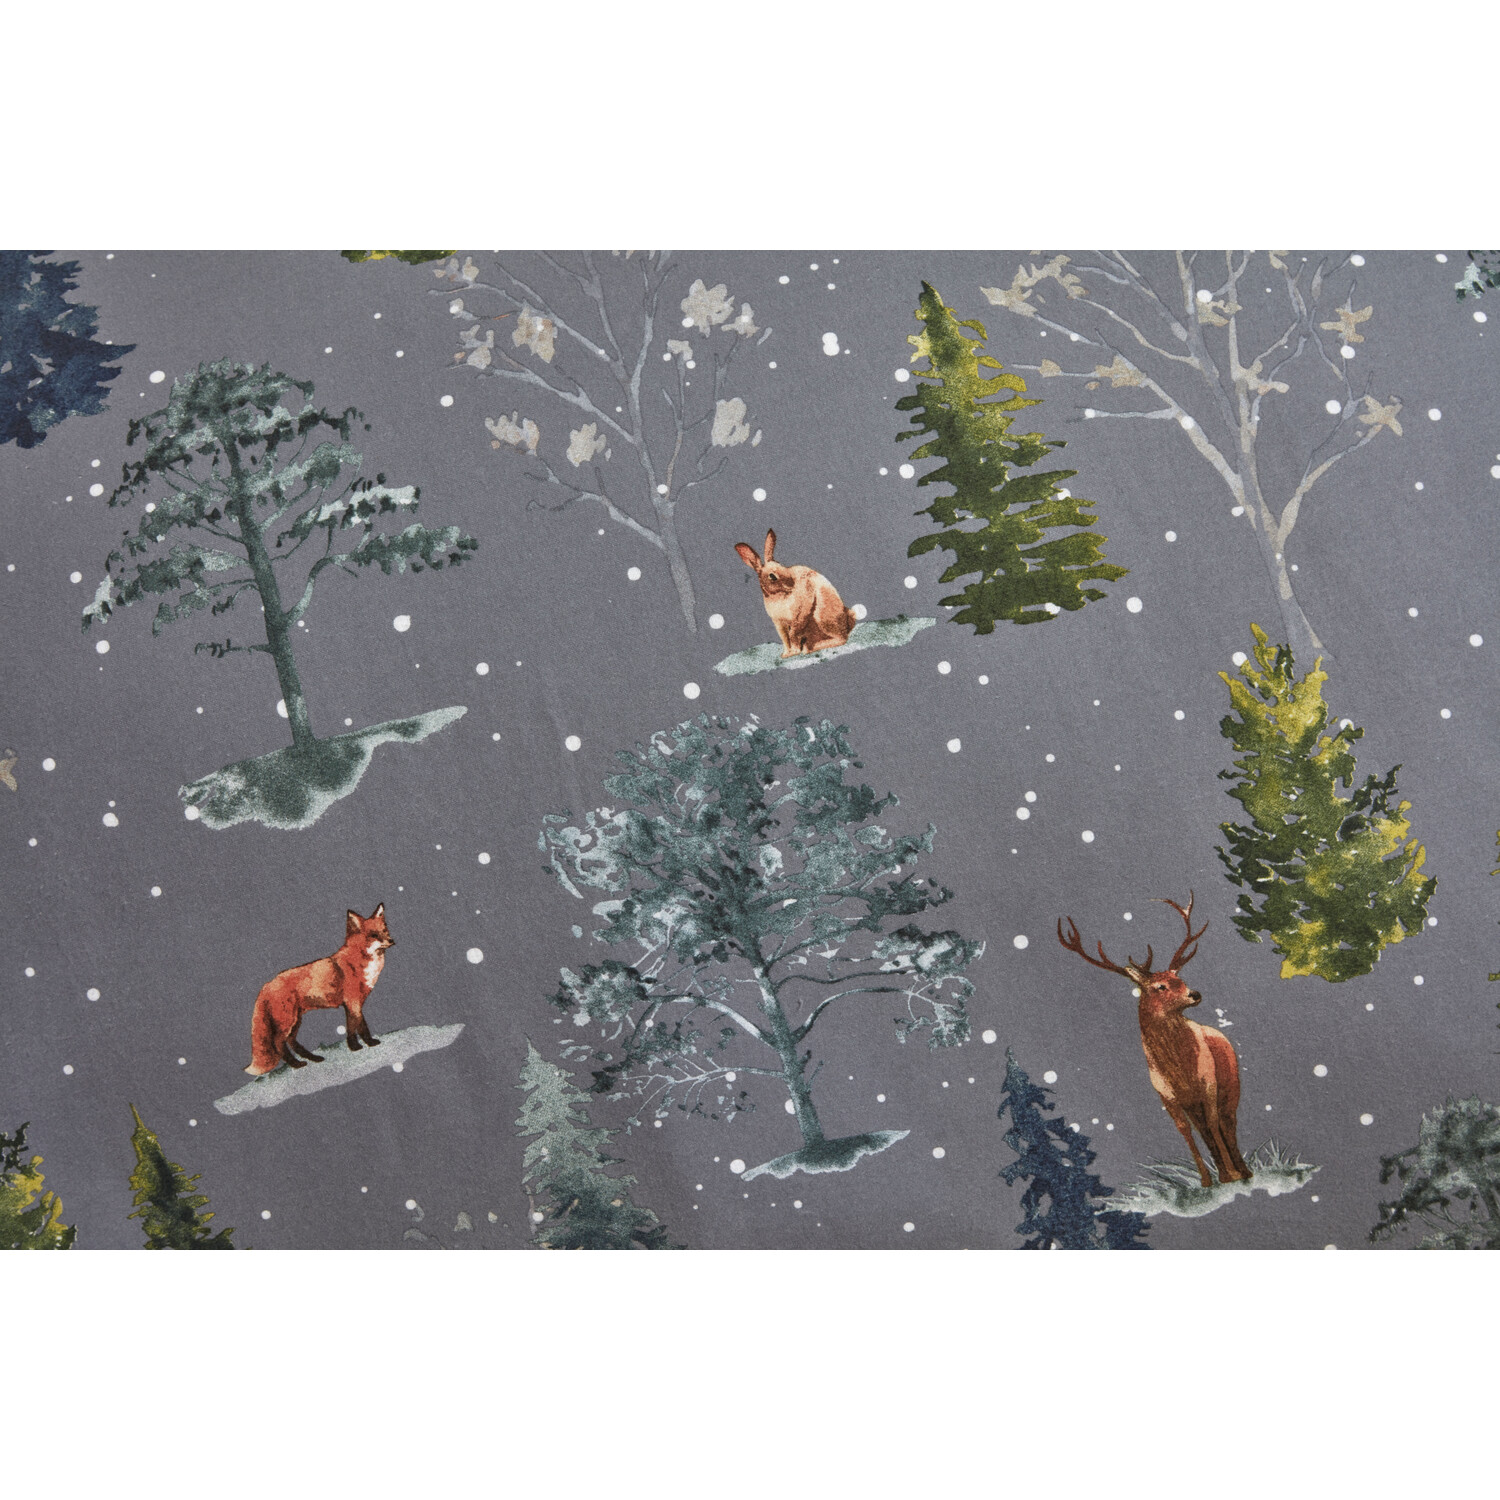 Snowy Forest Duvet Cover and Pillowcase Set - Grey / Superking Image 5